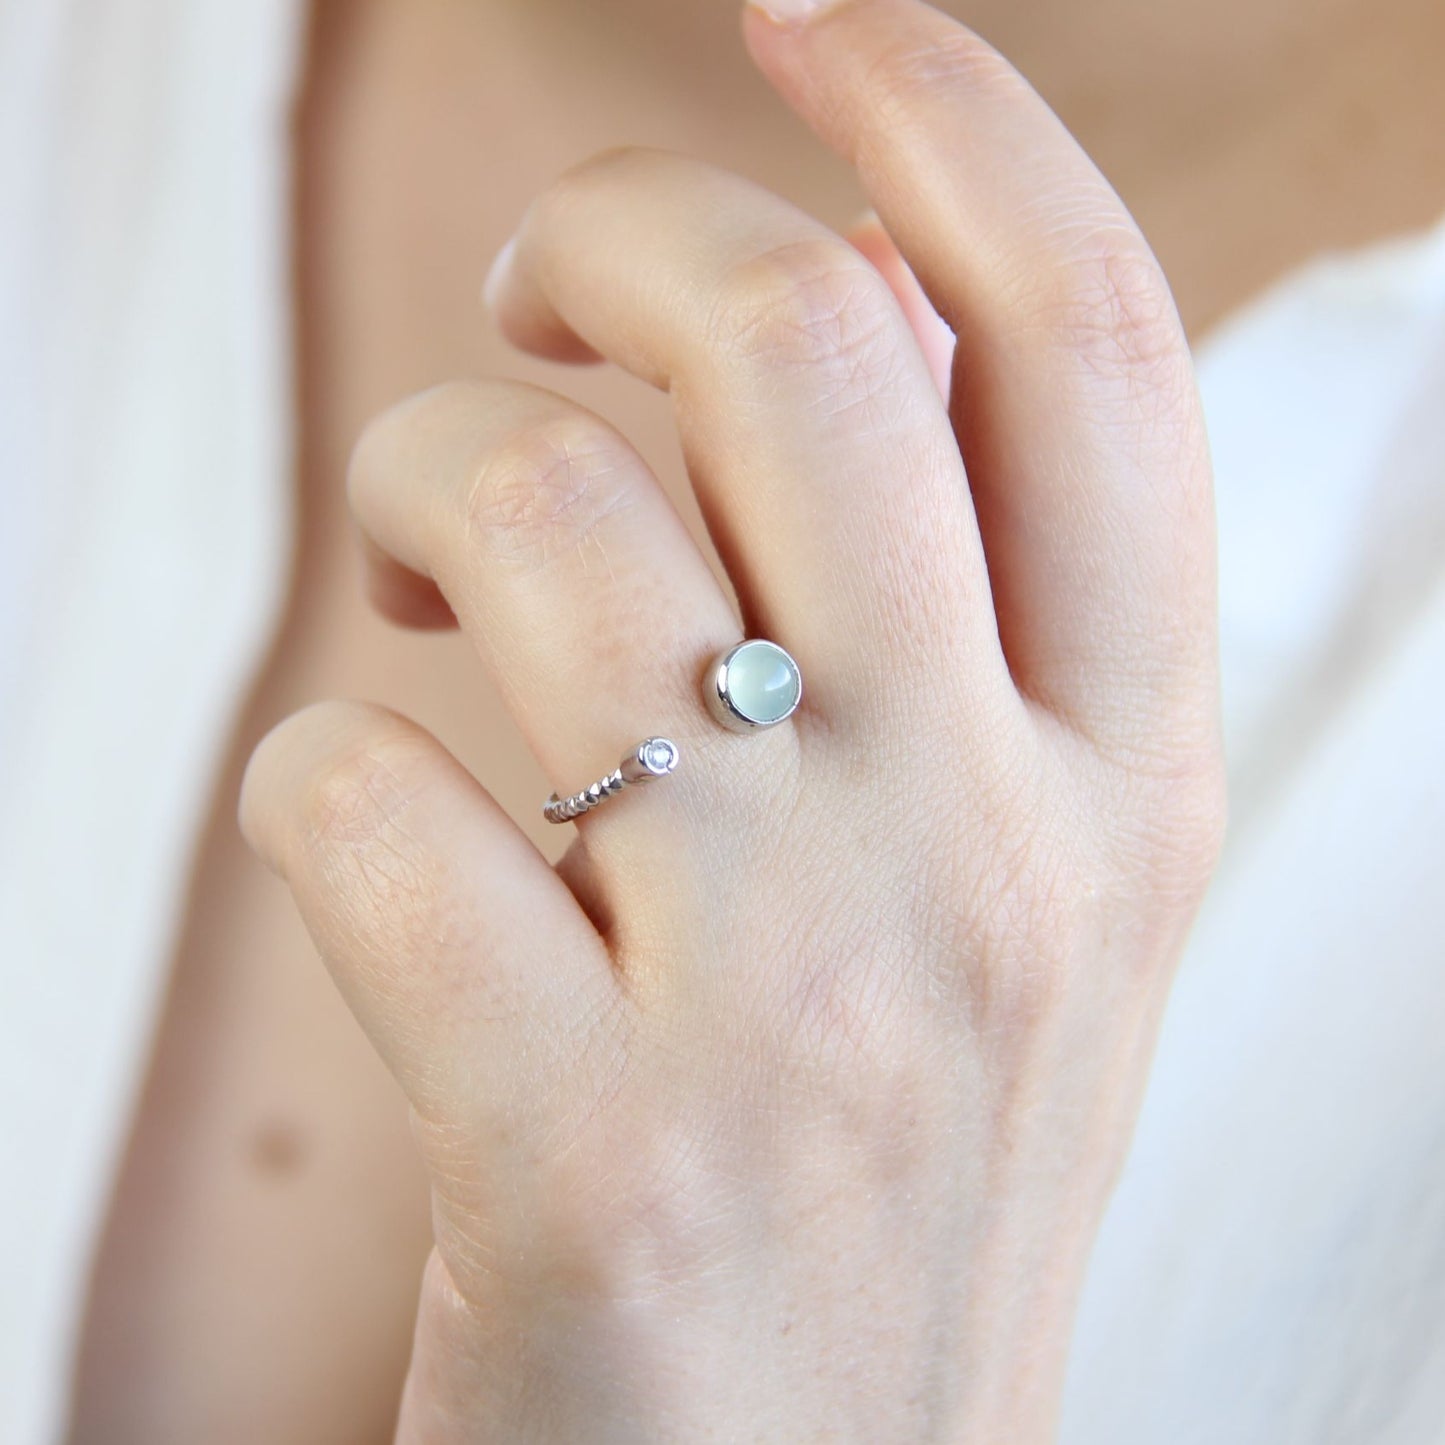 Chalcedony Ring, Chalcedony Jewelry, Gemstone Rings, Sterling Silver Jewelry, Zirconia Rings, Silver Rings for Women